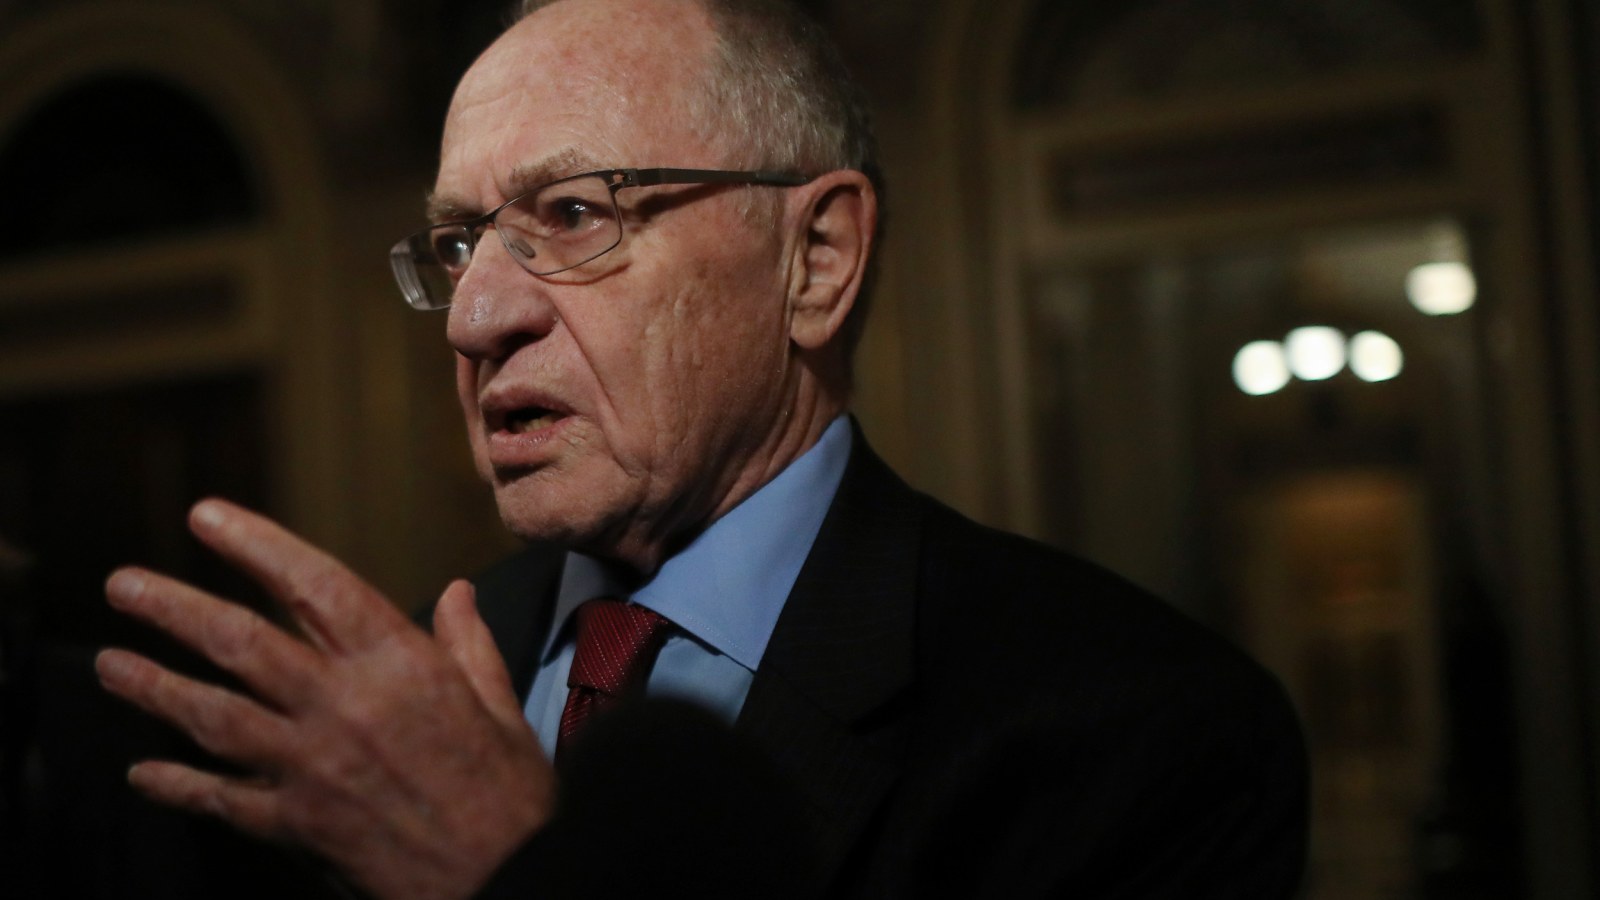 Dershowitz Is a Fan of Jackson, Blasts Pundit for Calling Her 'This Chick'